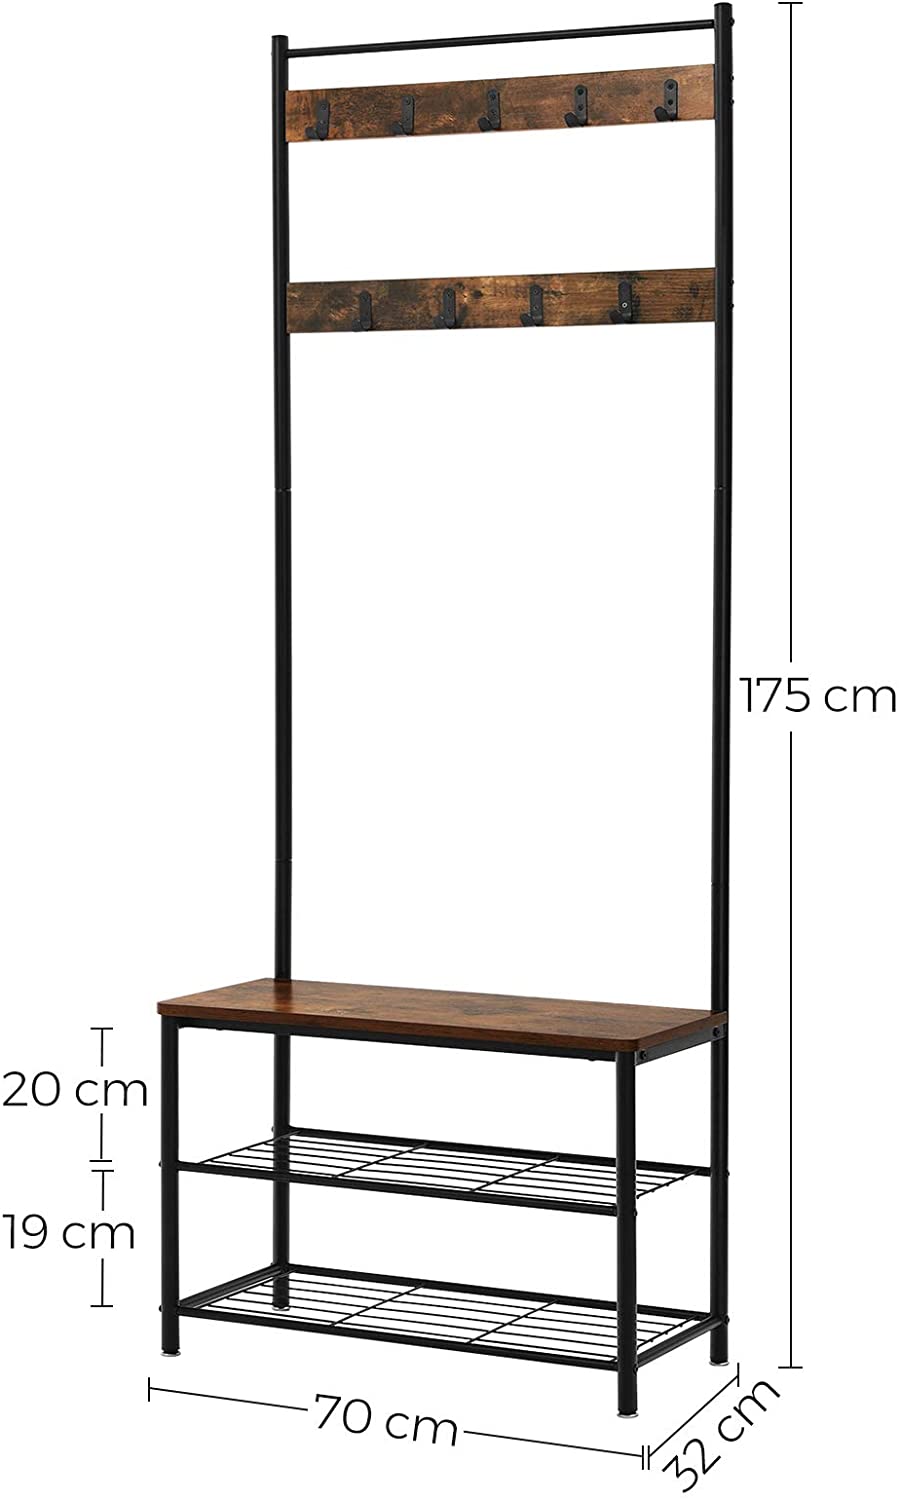 Rustic Brown Coat Rack With Shoe Rack, Bench, And Shelves, 175 Cm Height